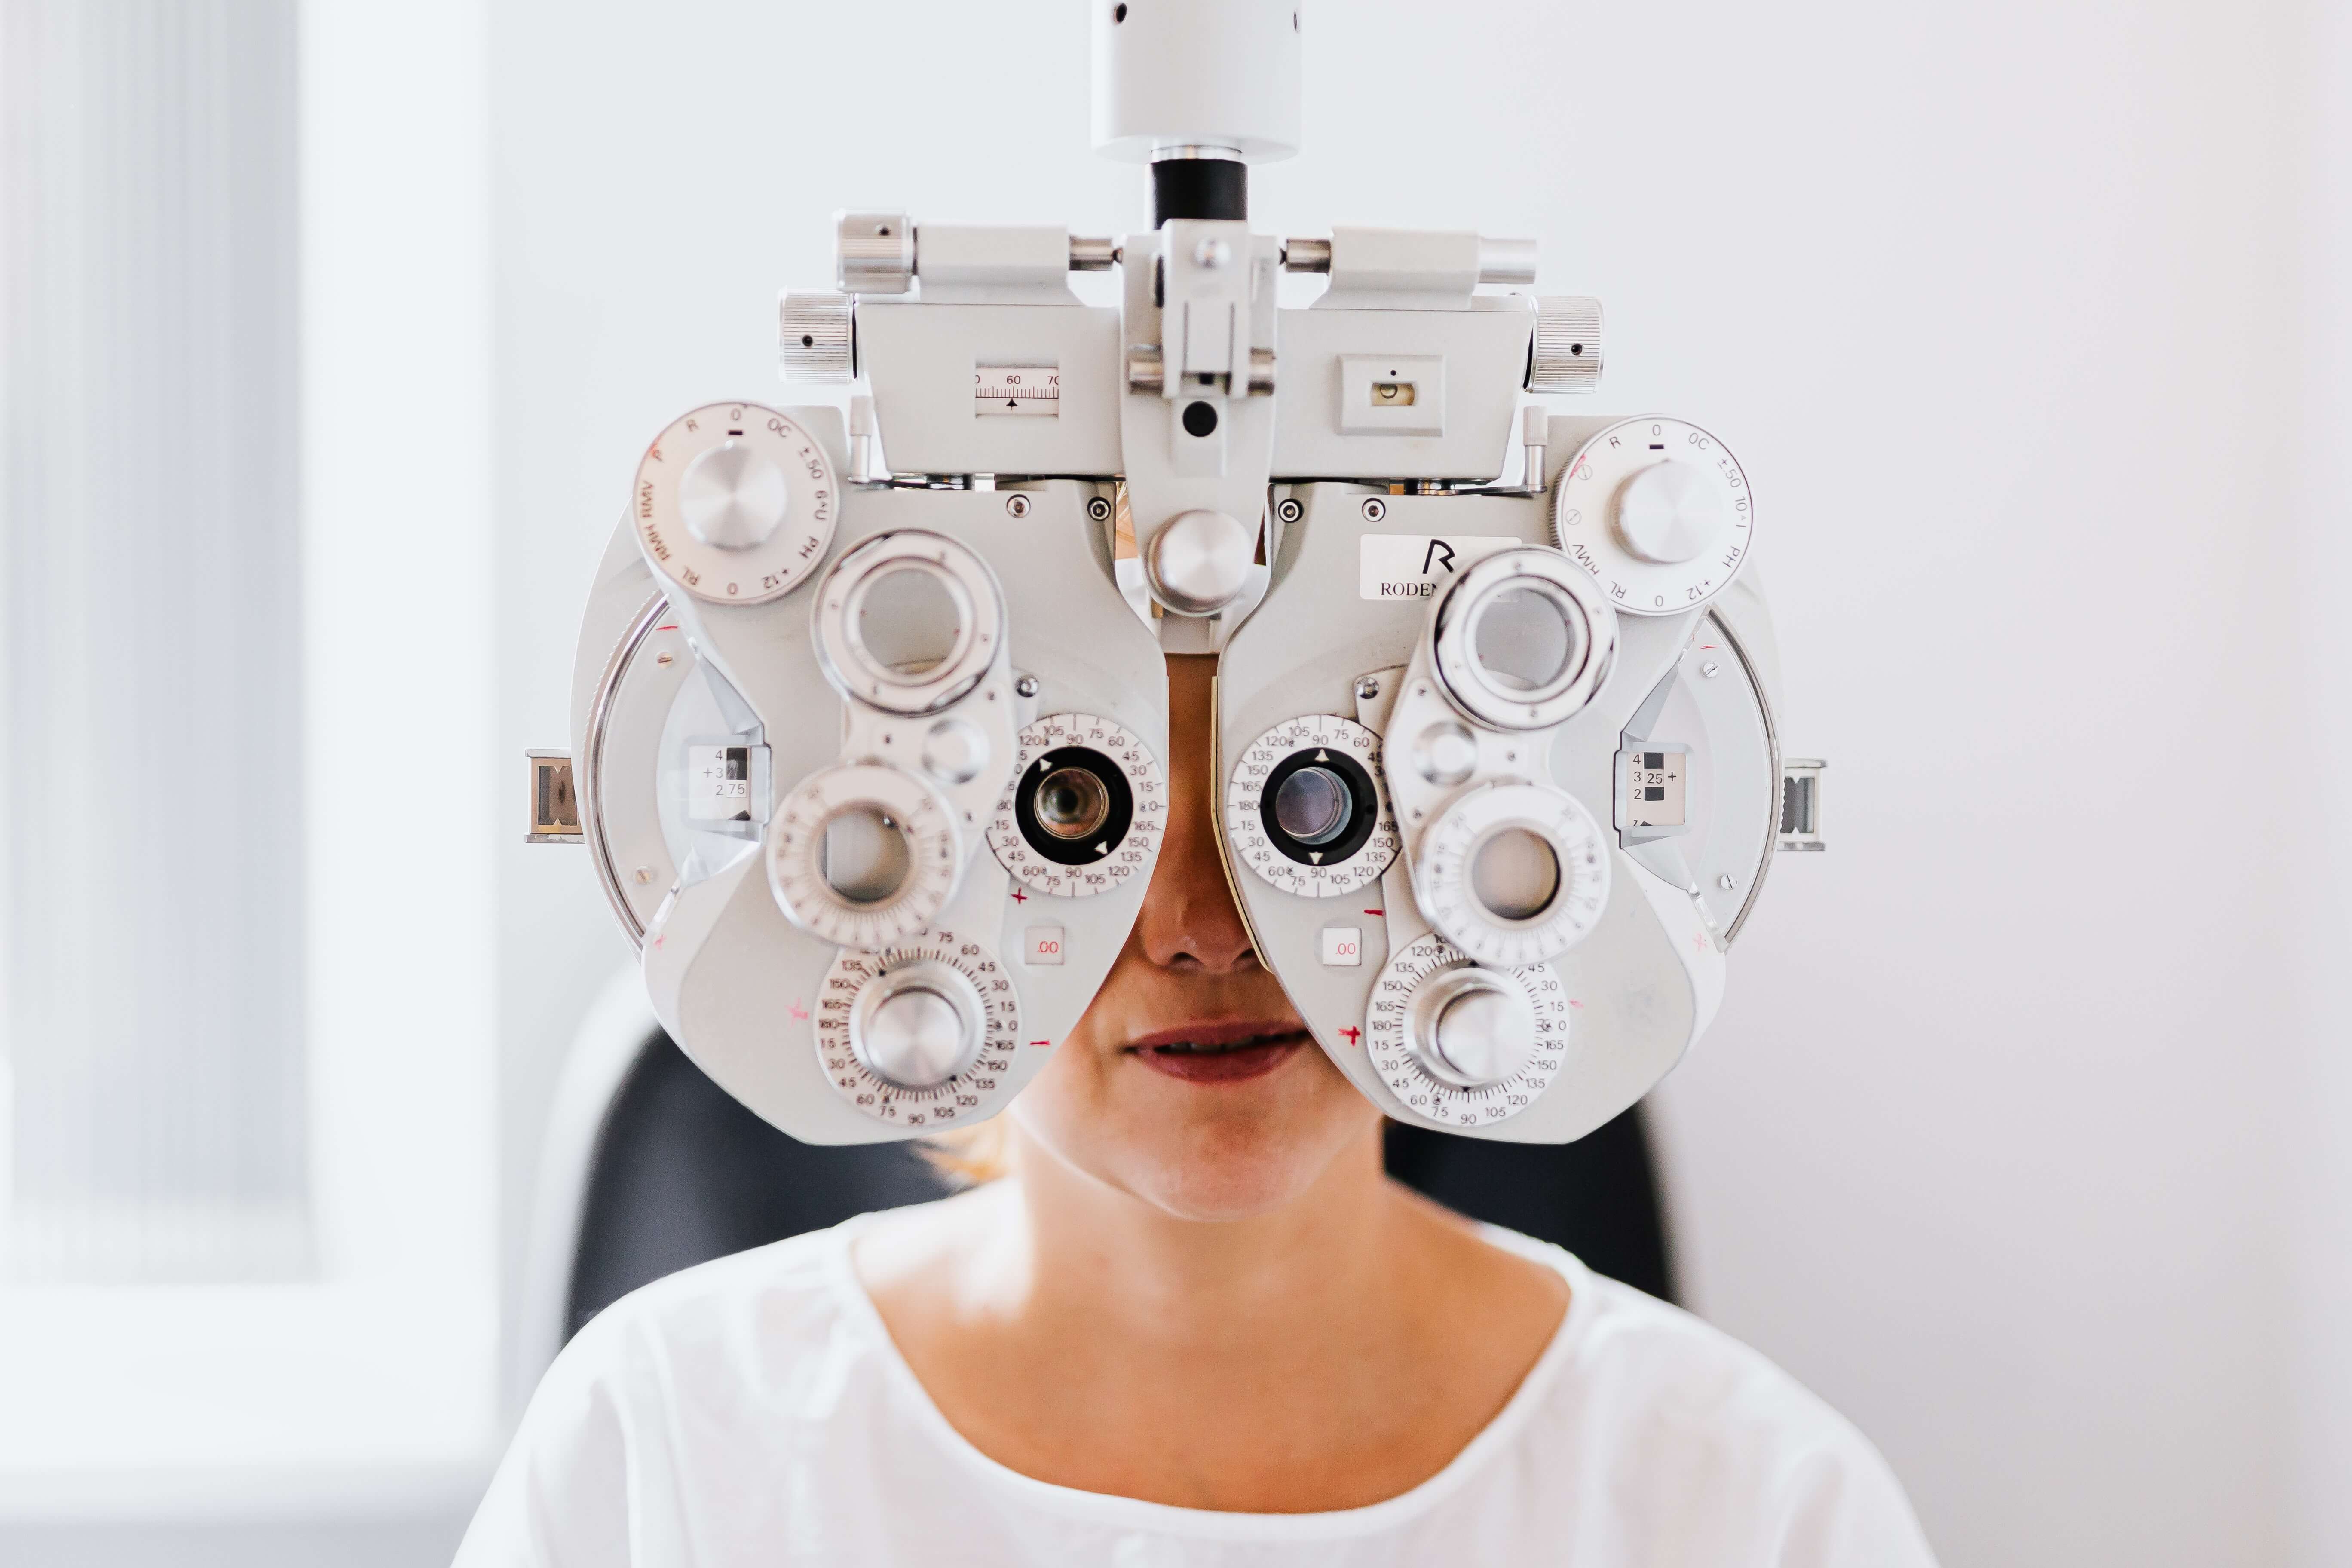 woman getting eyes tested